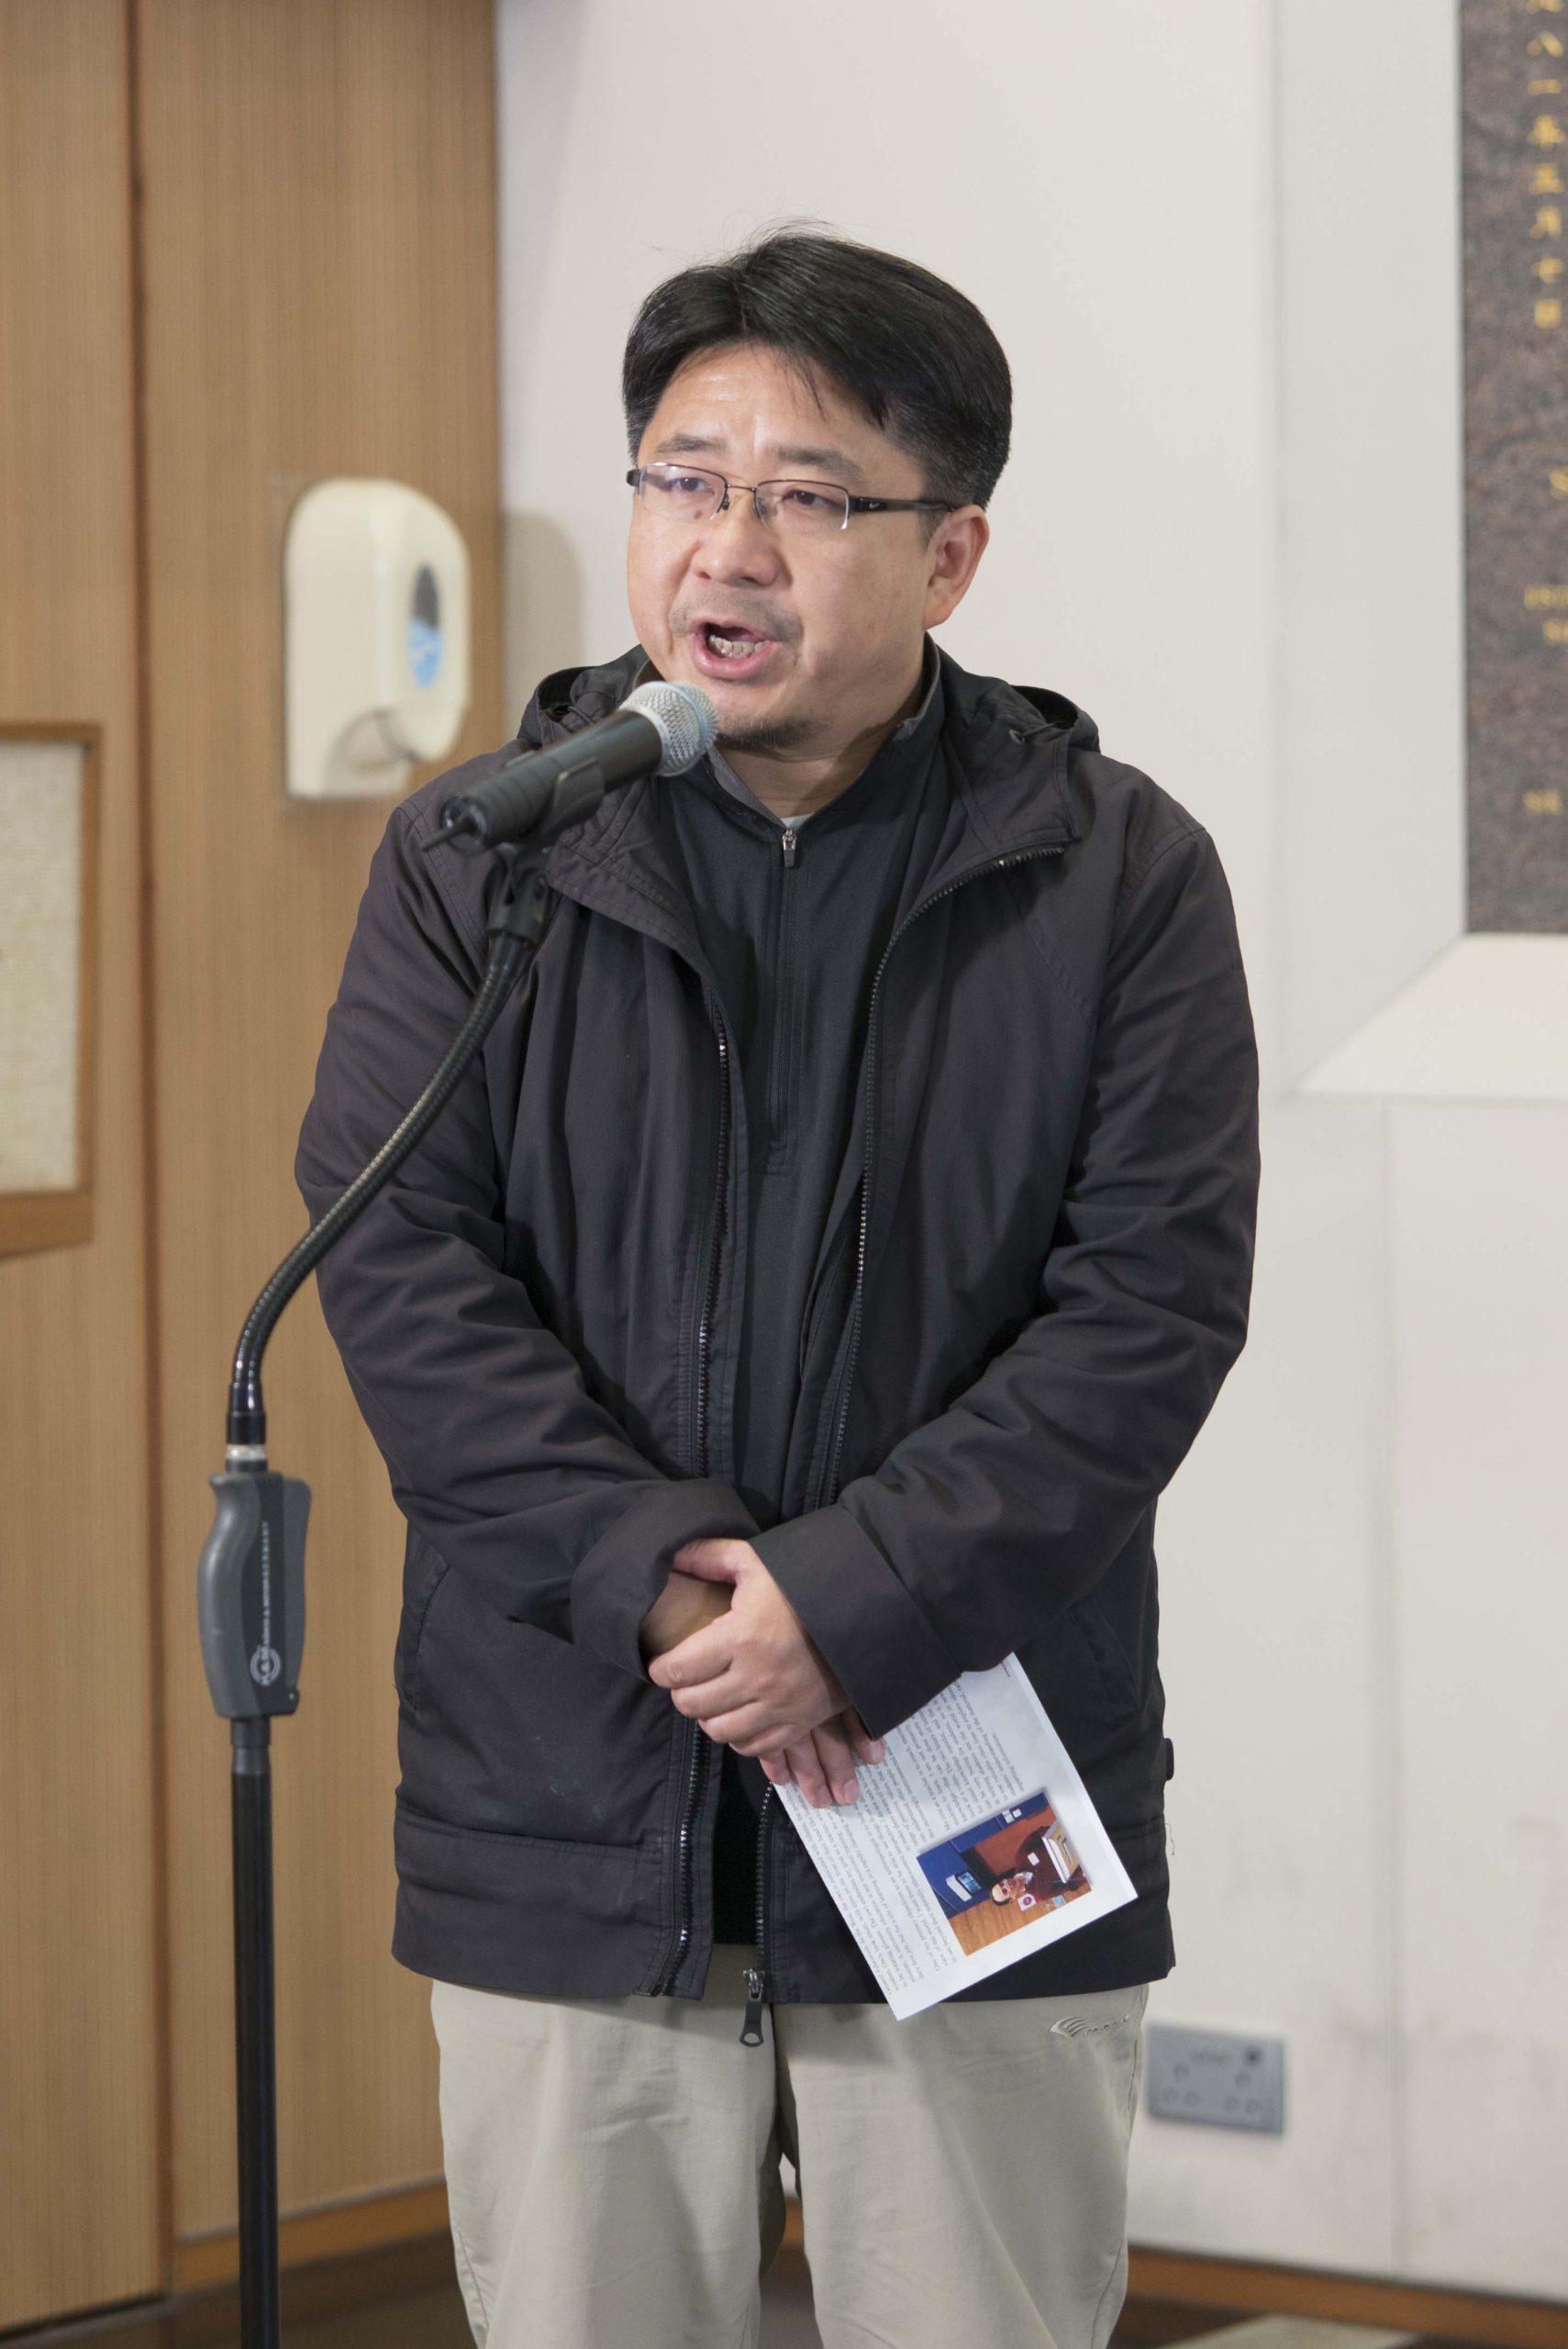 Introduction of Prof. Bosco by Prof. Cheung Chin Hung<br />
(nominator of Prof. Joseph Bosco)